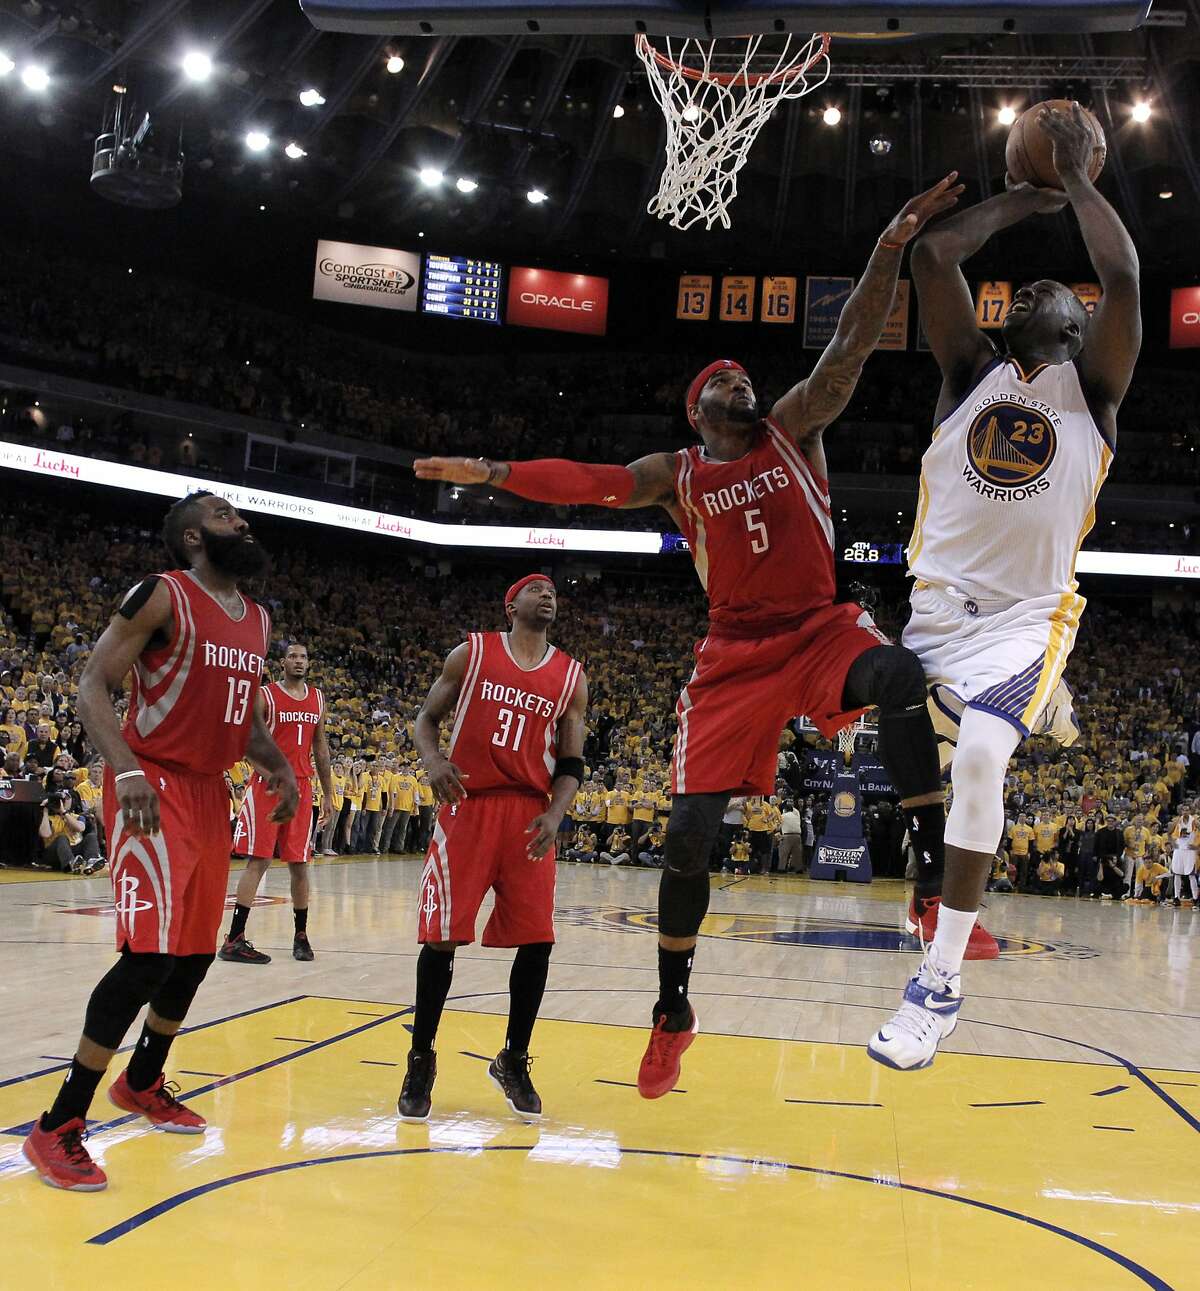 Draymond Green (23) shoots during the second half as the Golden State Warriors played the Houston Rockets in Game 1 of the Western Conference finals at Oracle Arena in Oakland, Calif., on Tuesday, May 19, 2015. The Warriors defeated the Rockets 110-106.